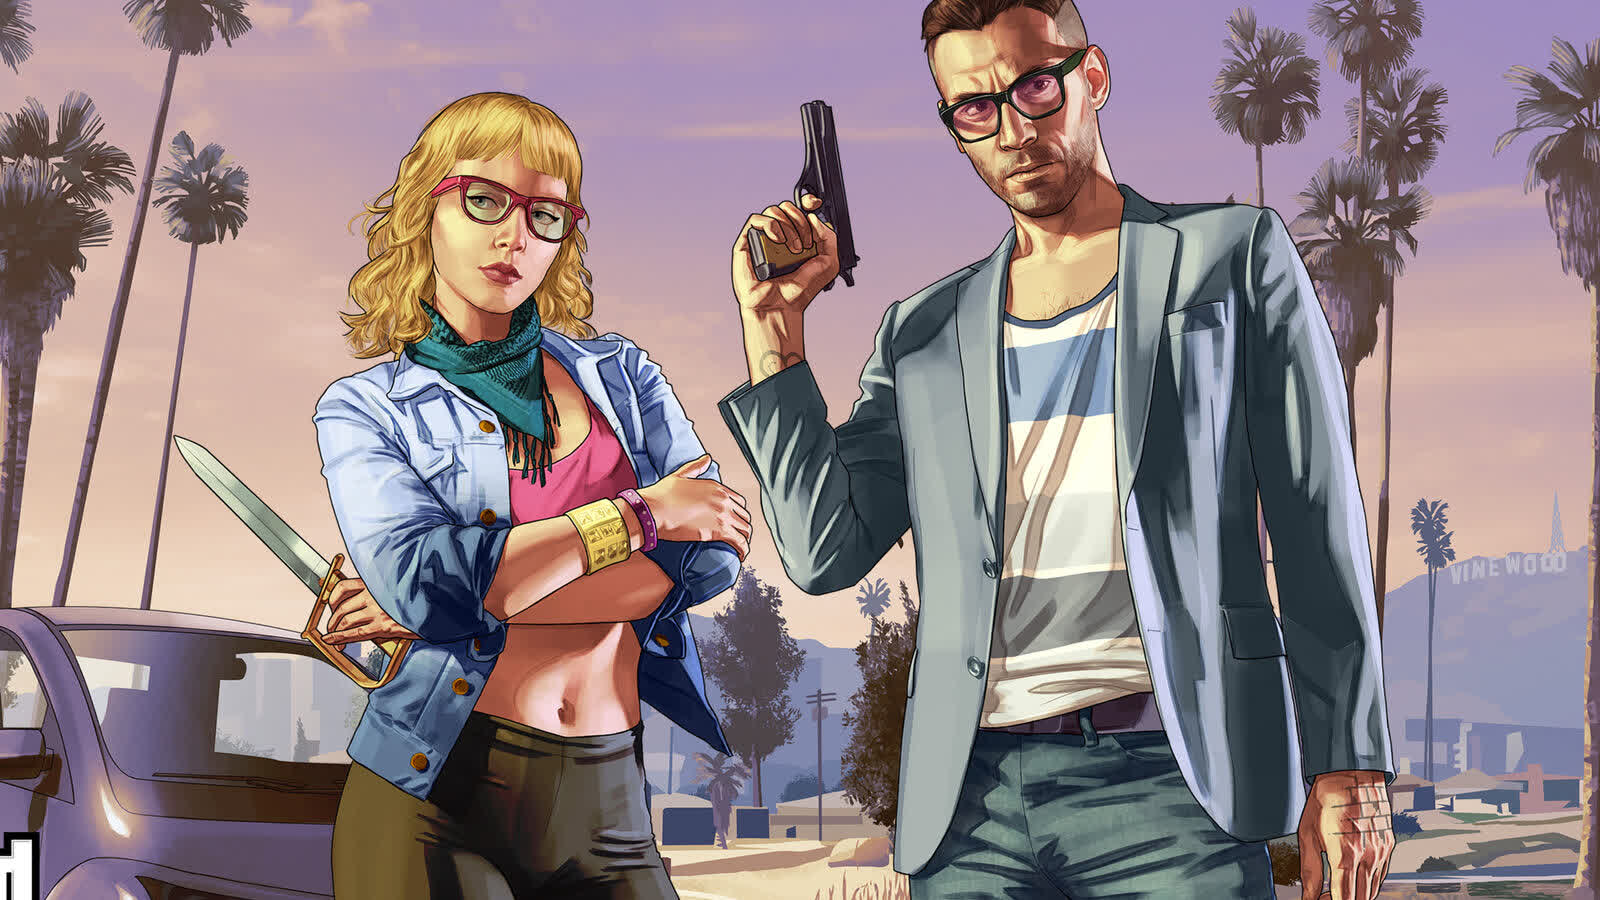 Take-Two repeats hint that GTA 6 will arrive next year